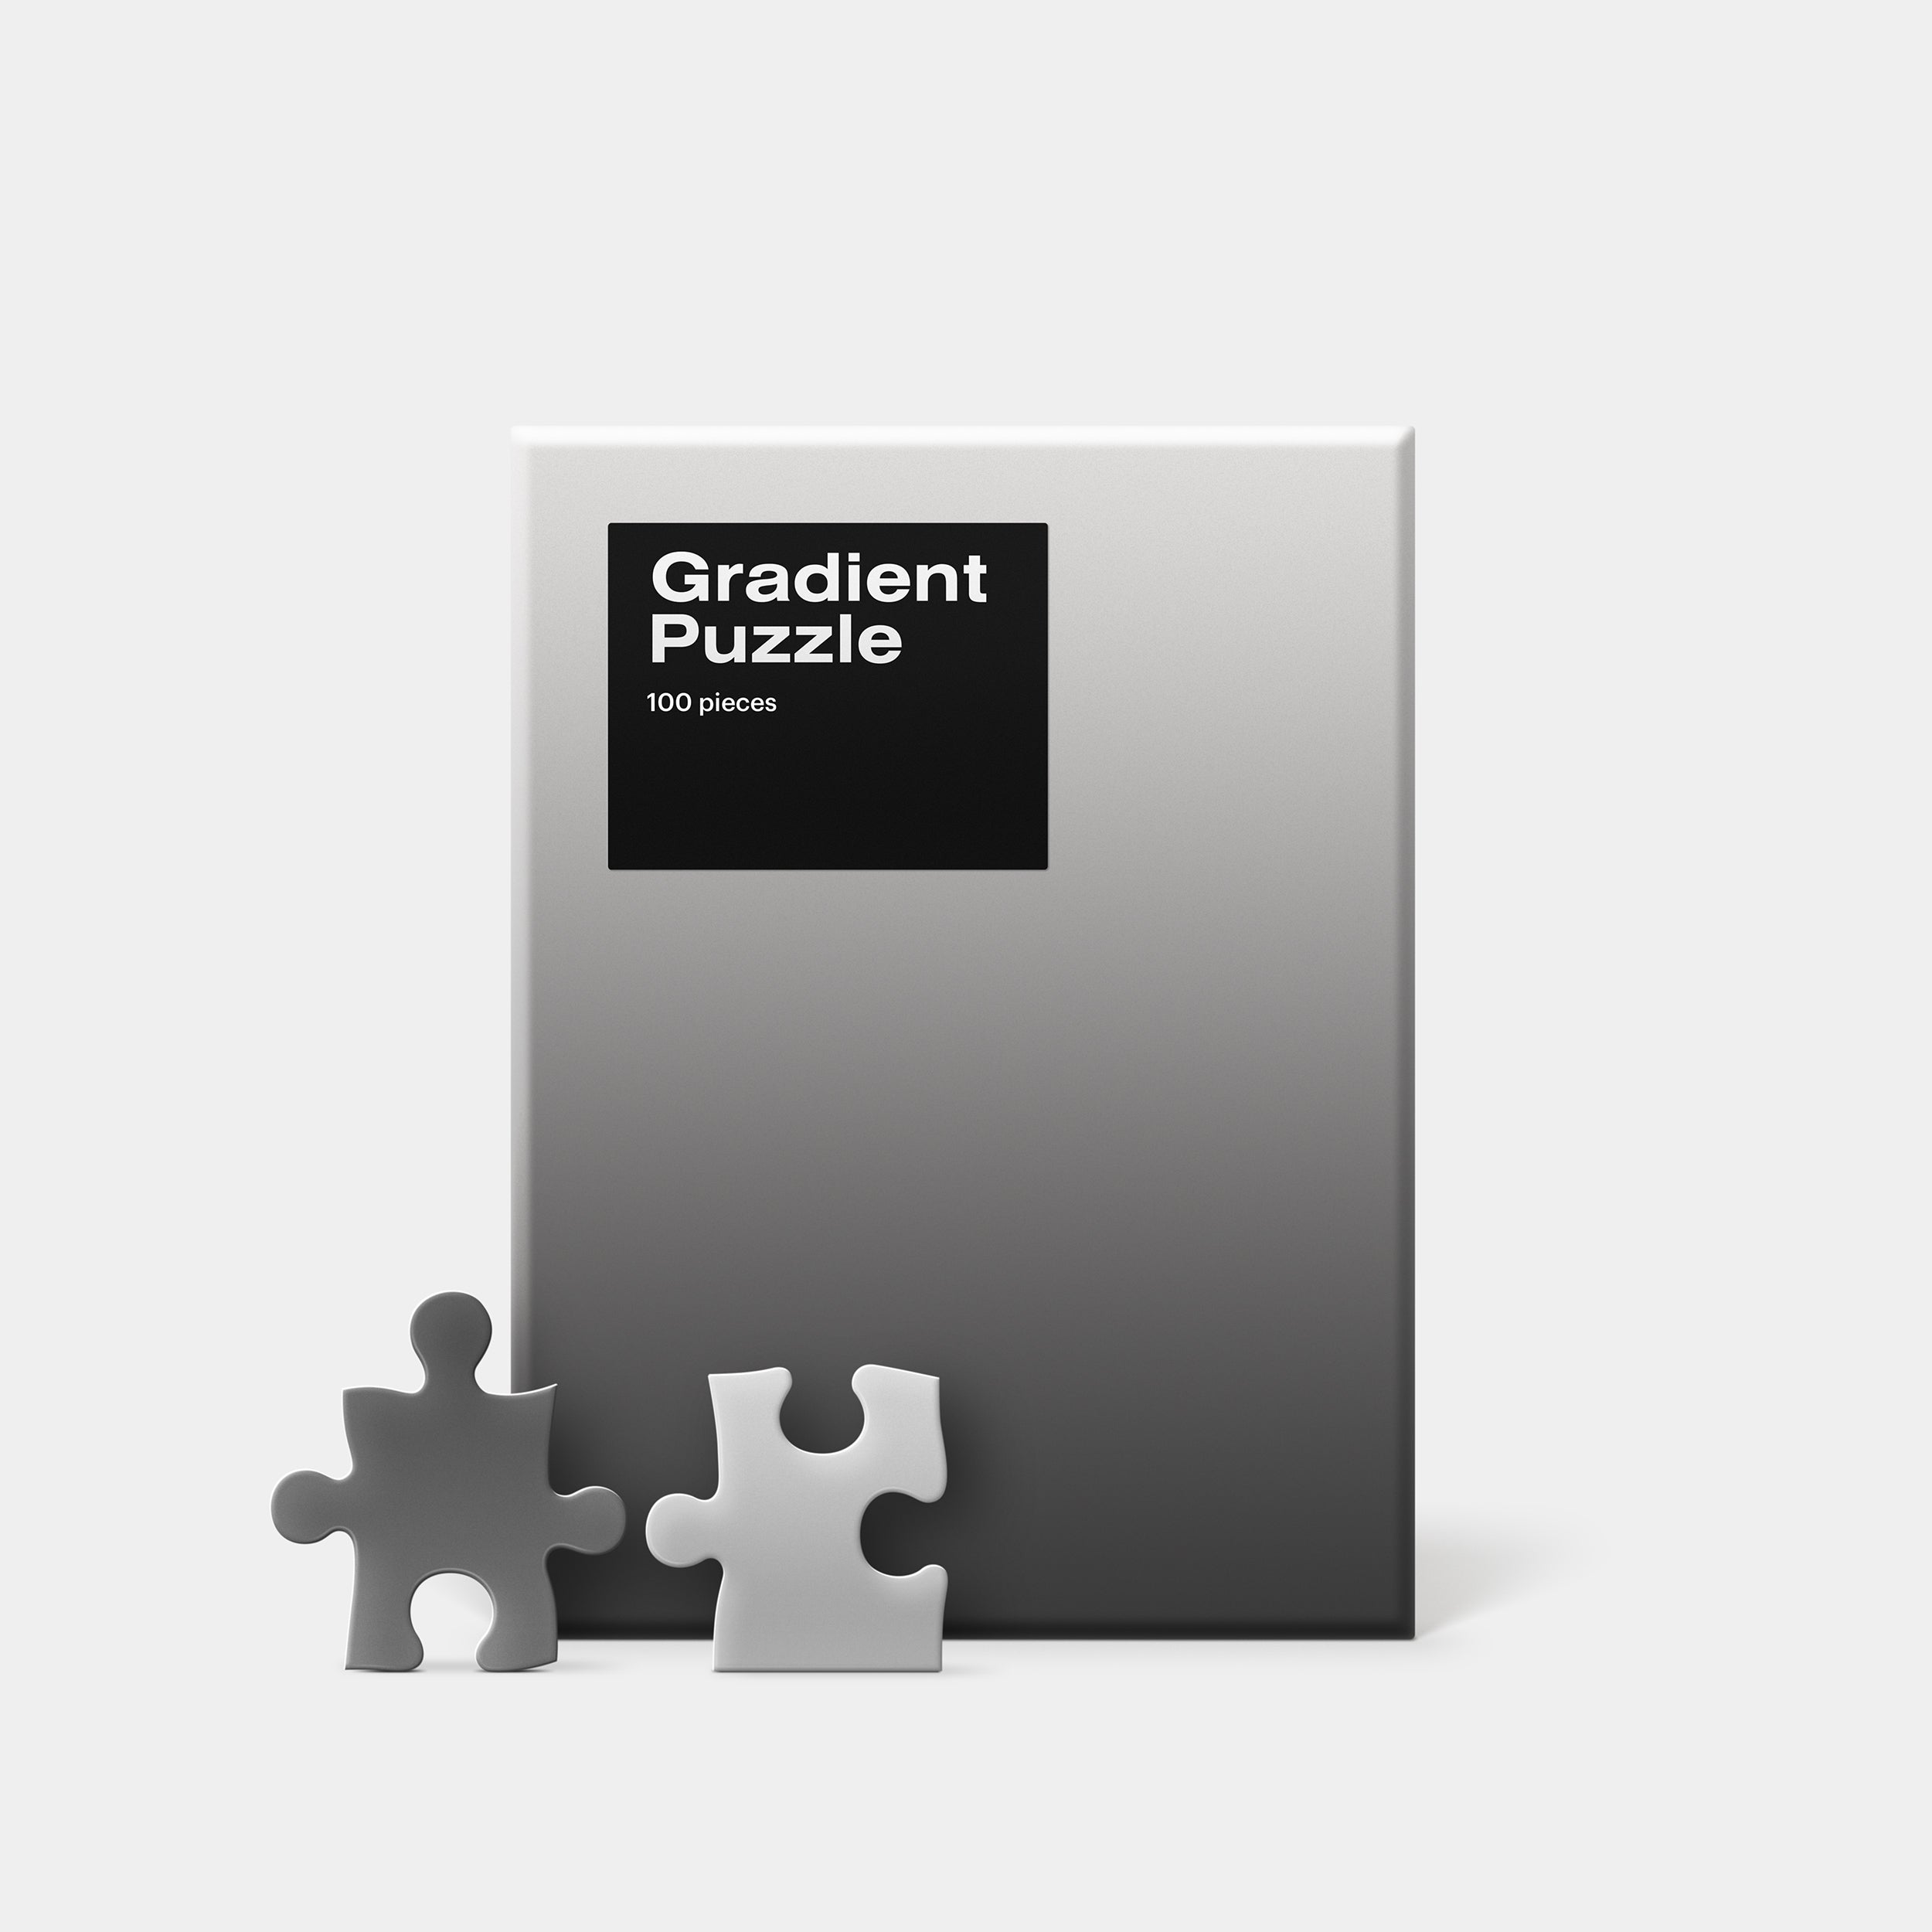 Gradient Puzzle by Bryce Wilner for Areaware